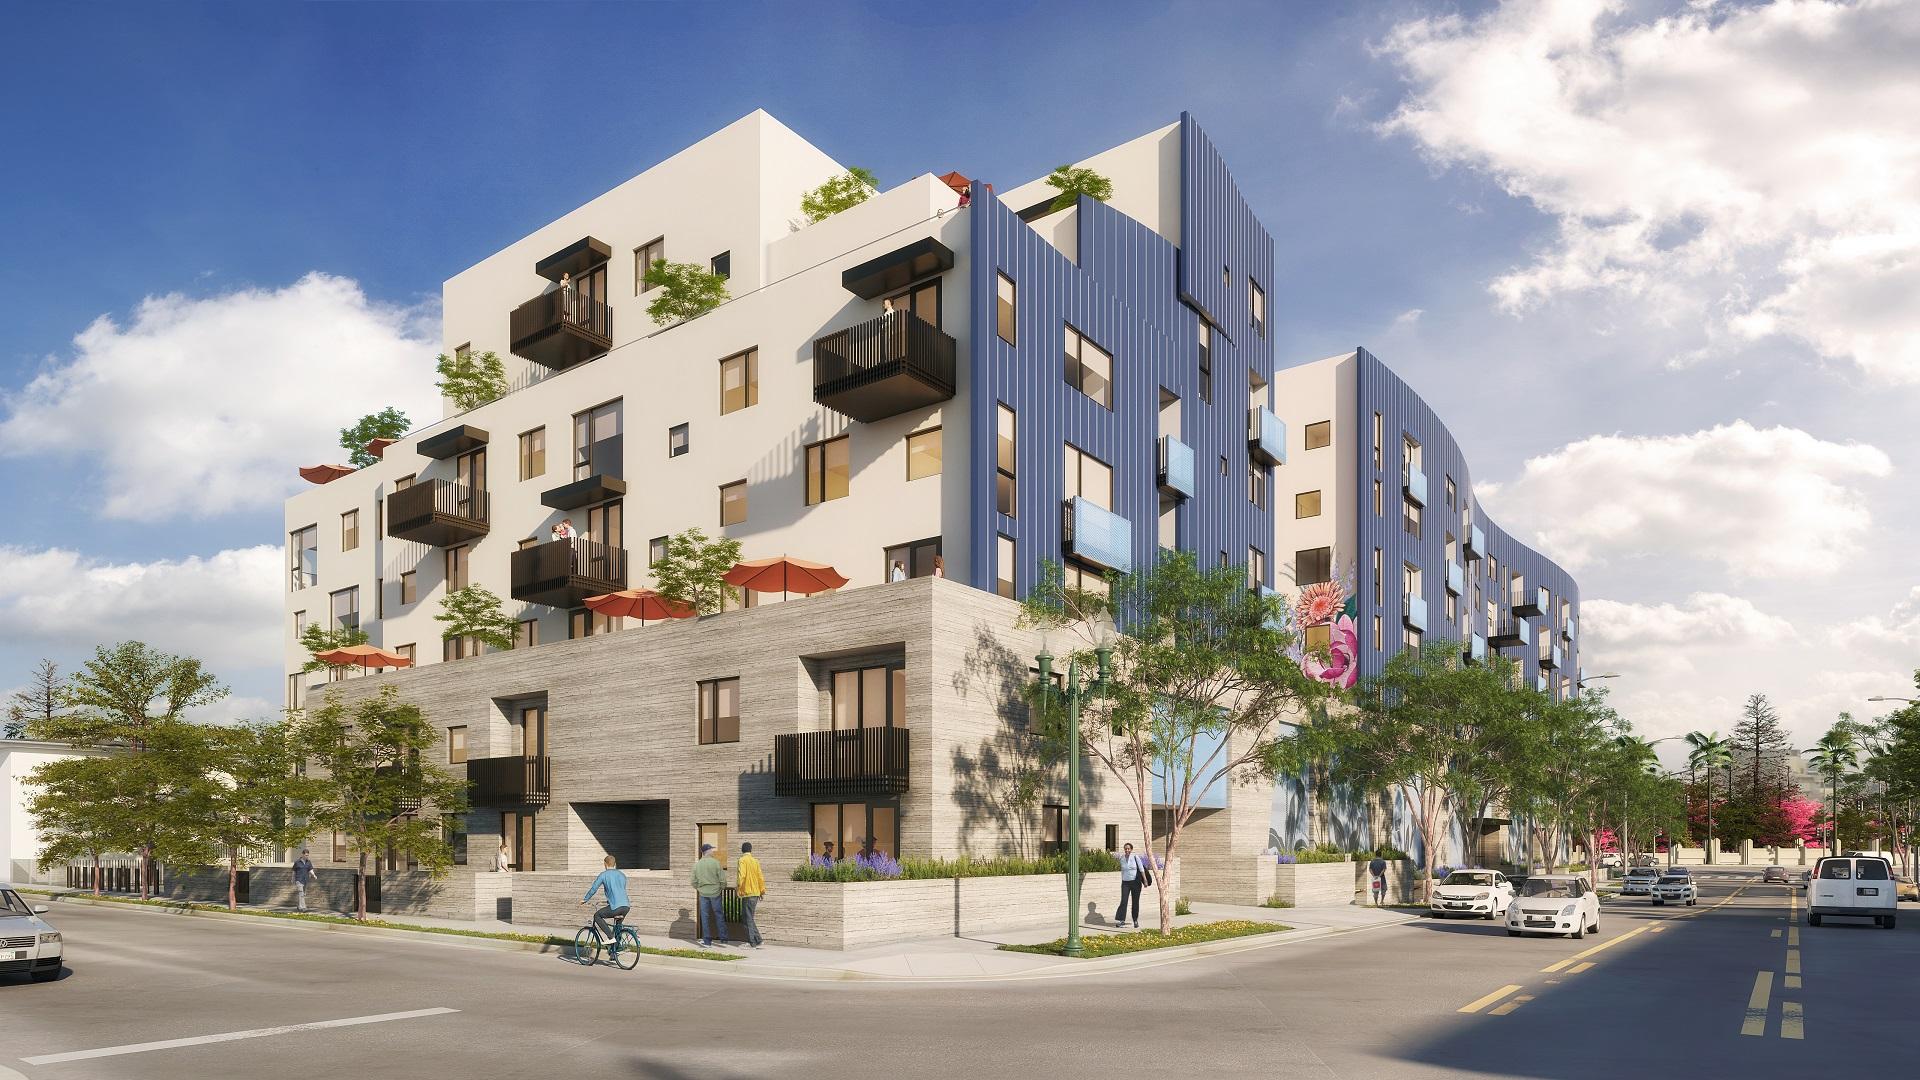 3601 Mission Road Rendering